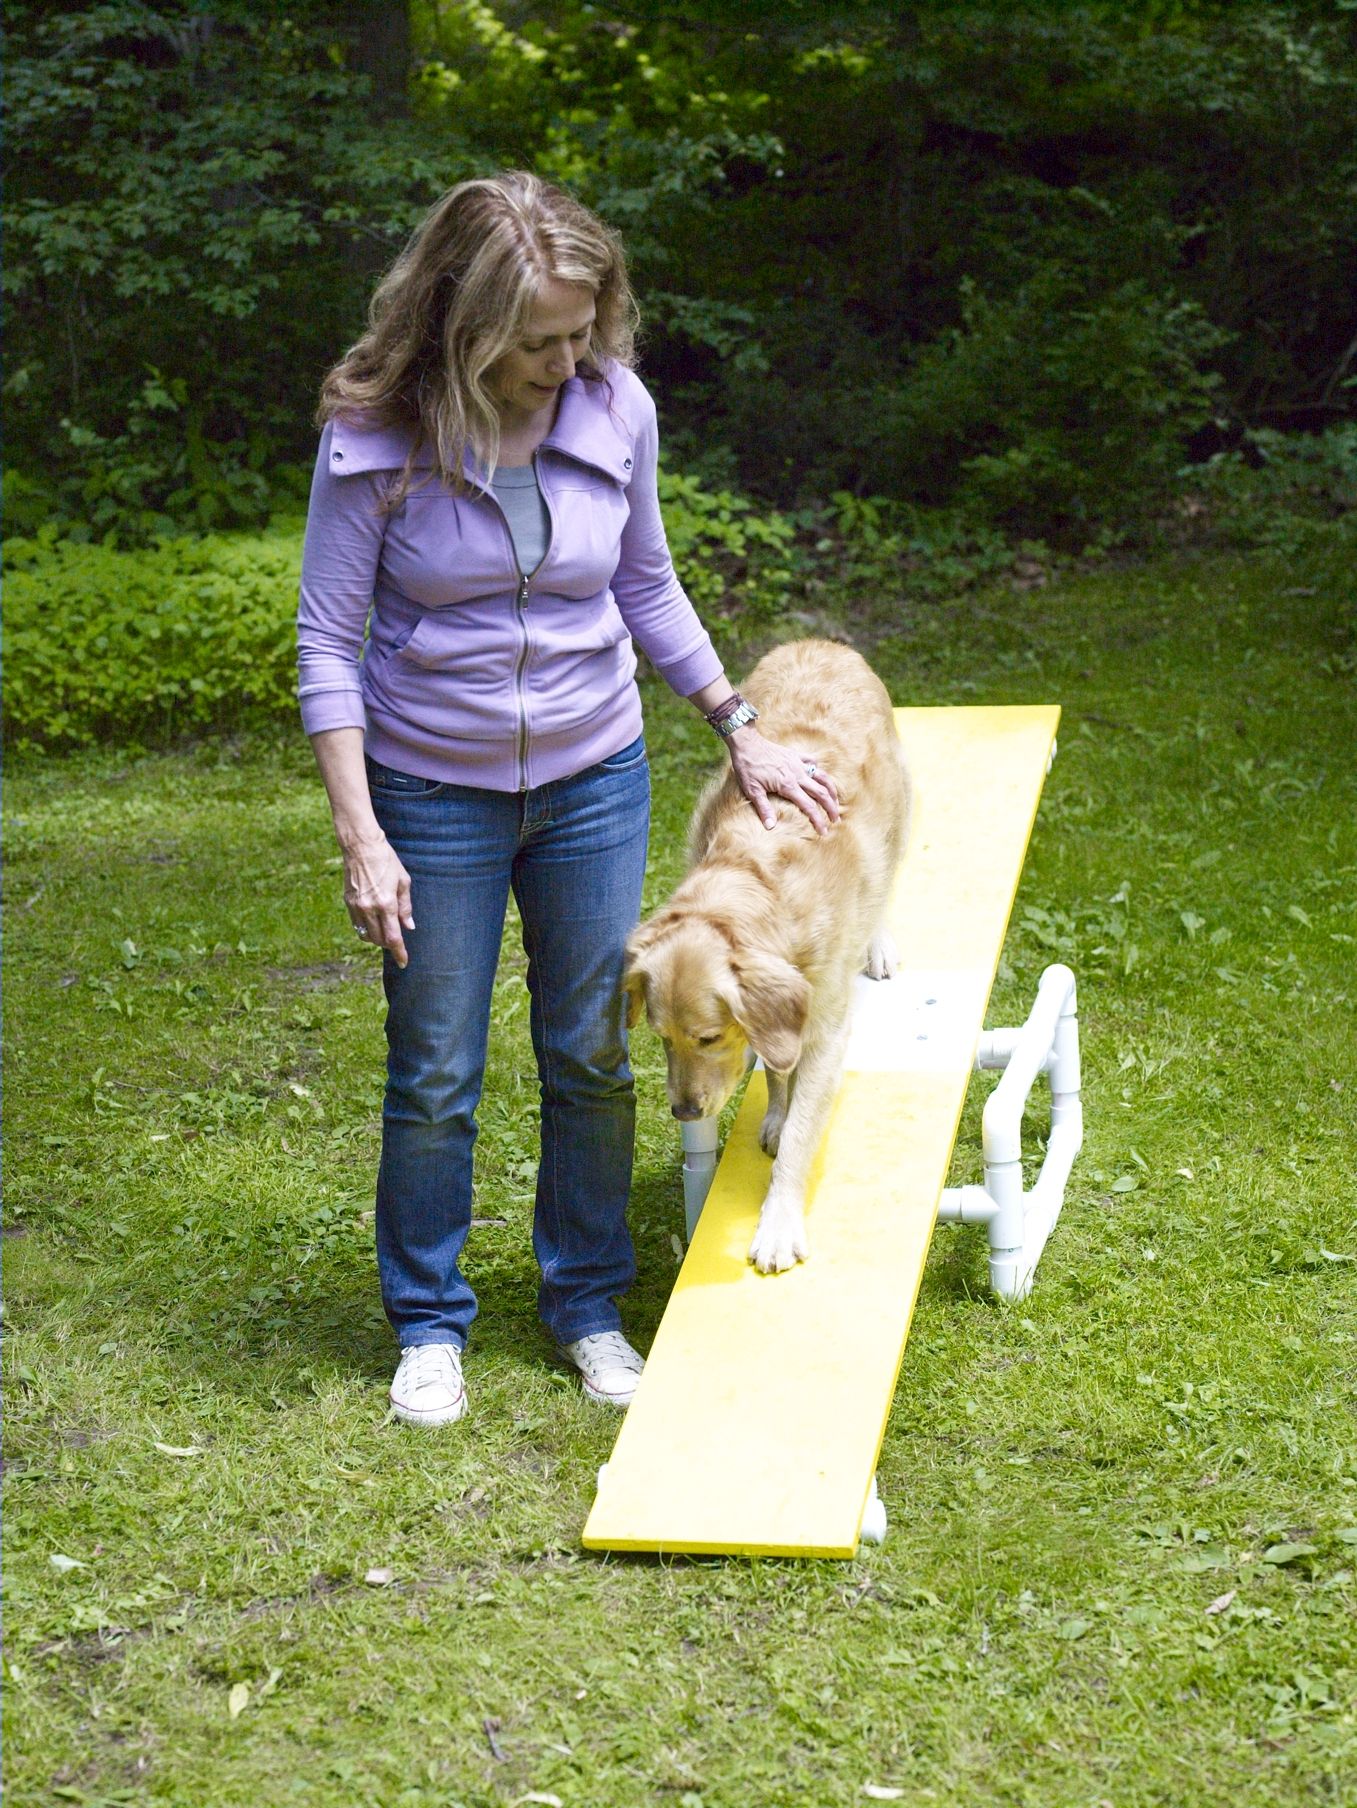 DIY: How to Make Your Own Dog Agility Course - Petful